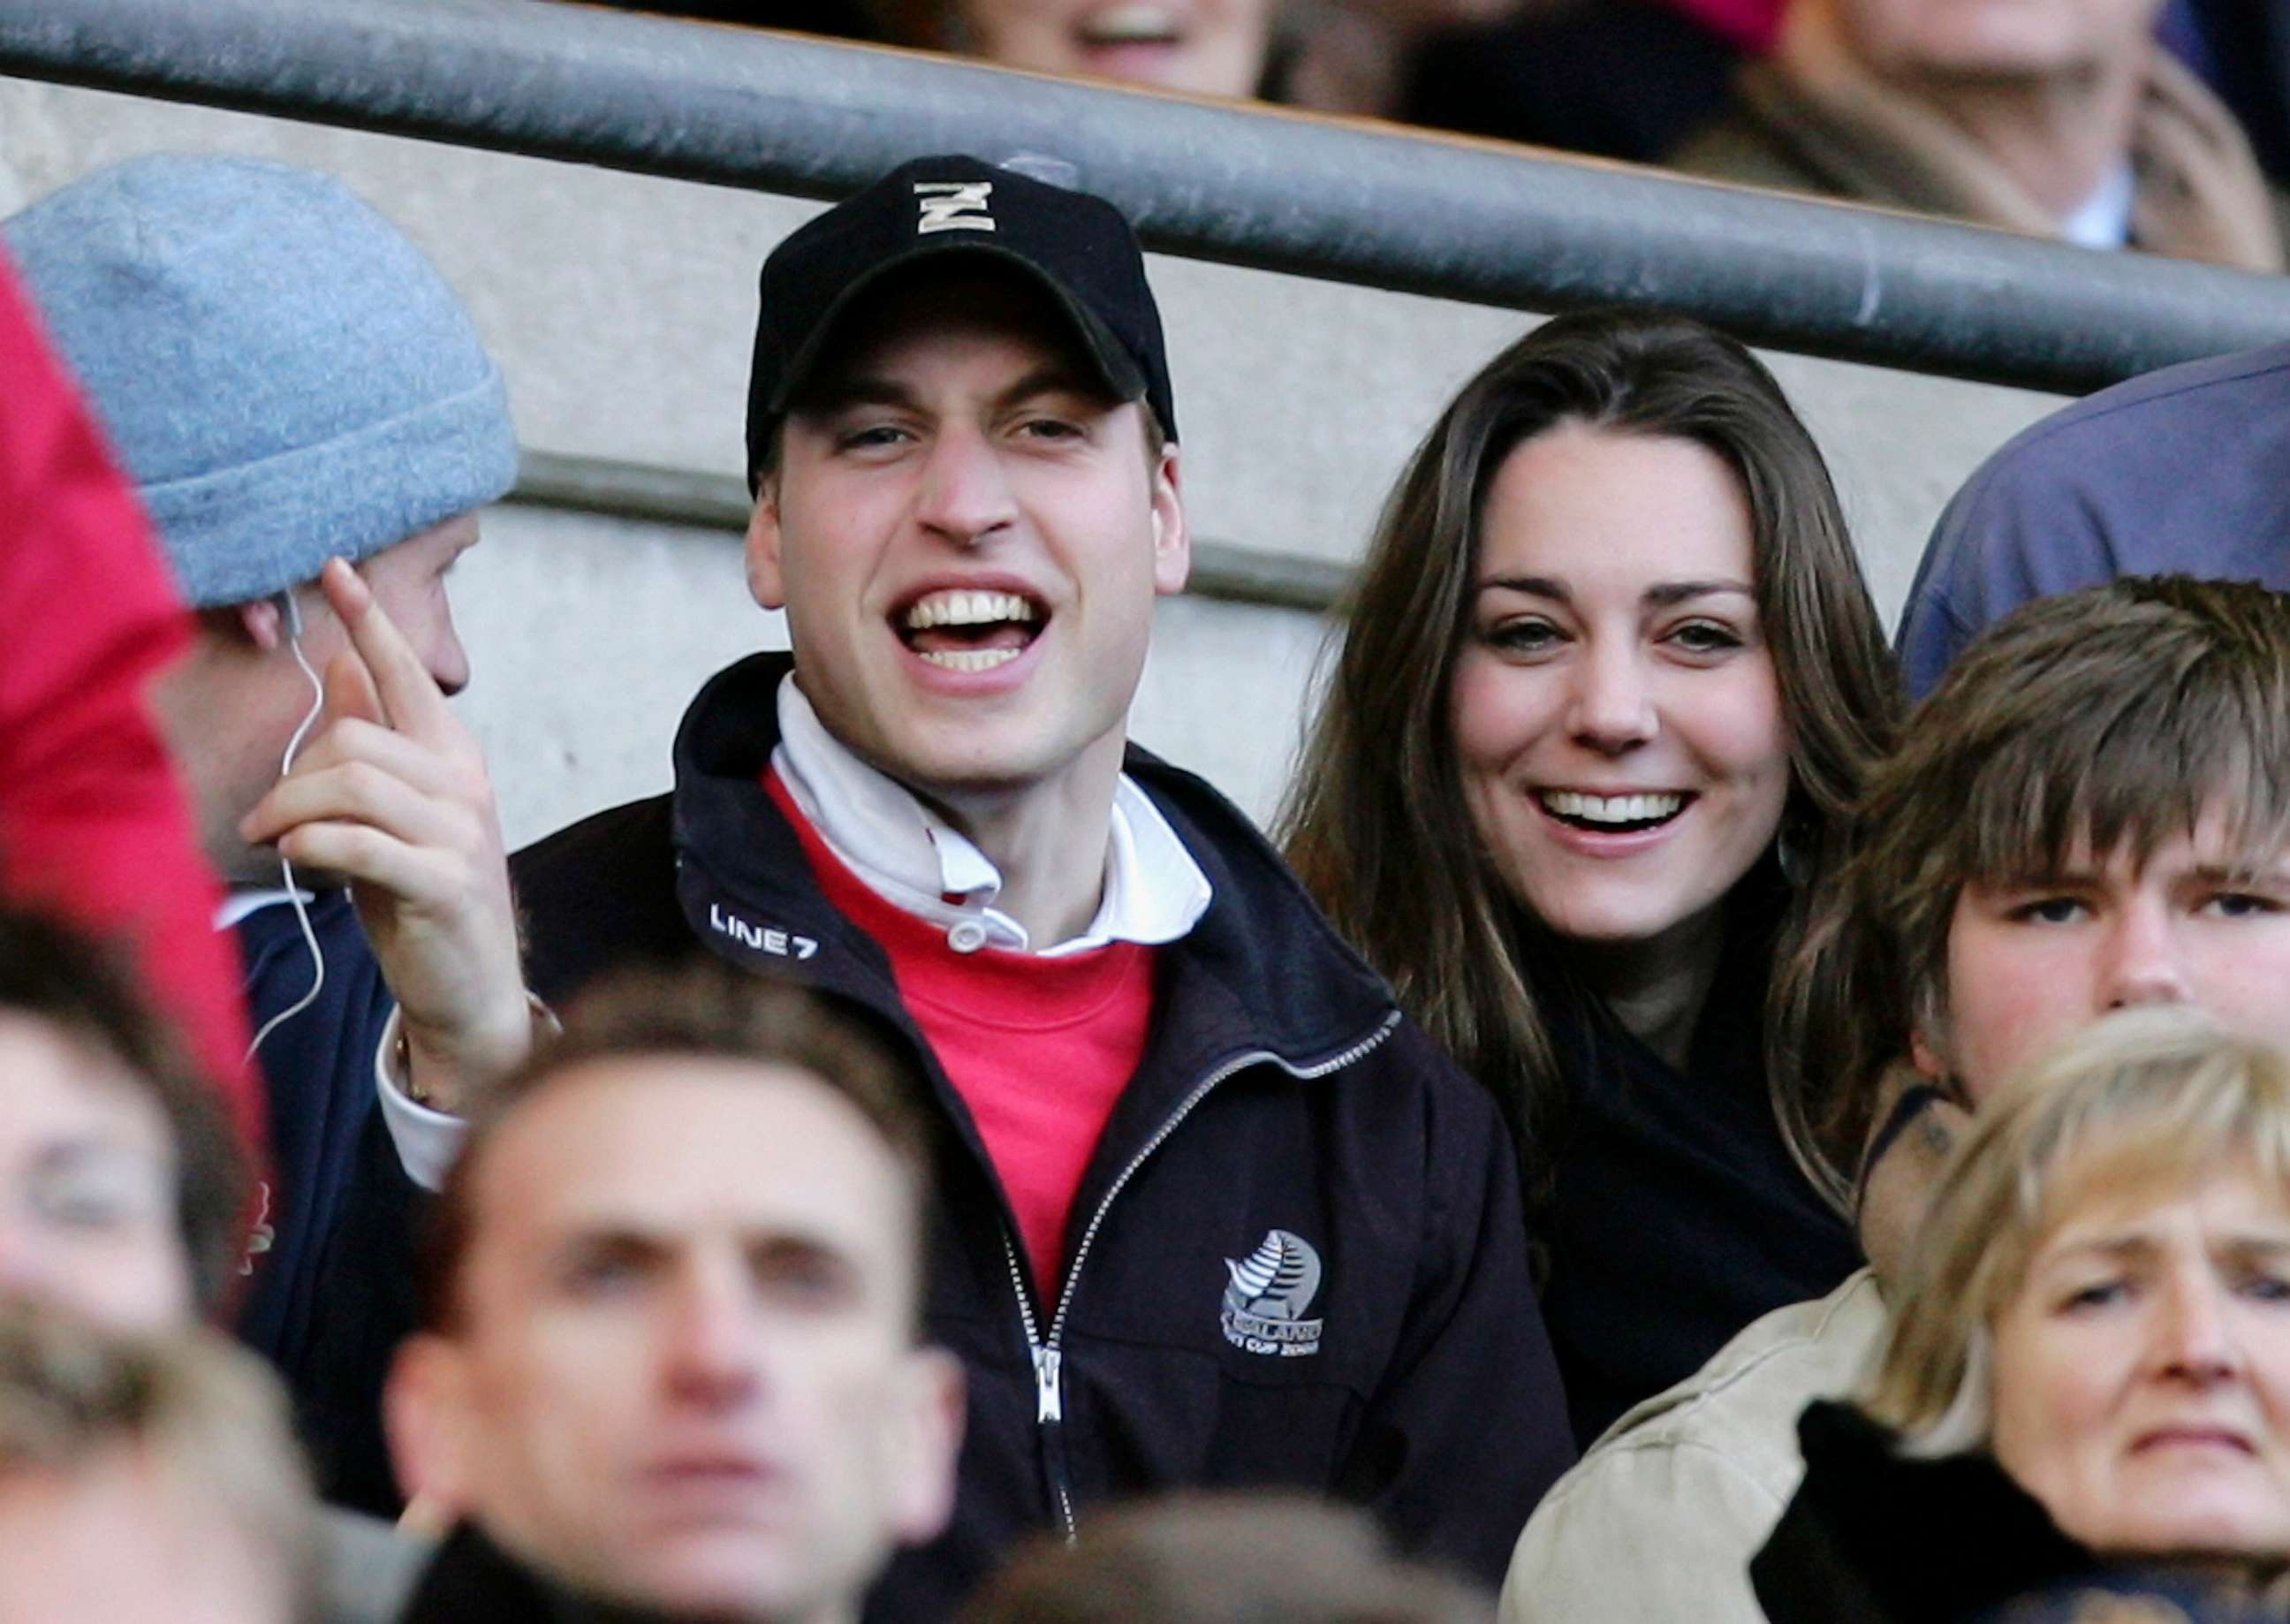 PHOTO: Prince William and Kate Middleton cheer on the English team during ta match between England and Italy at Twickenham, Feb. 10, 2007, in London.